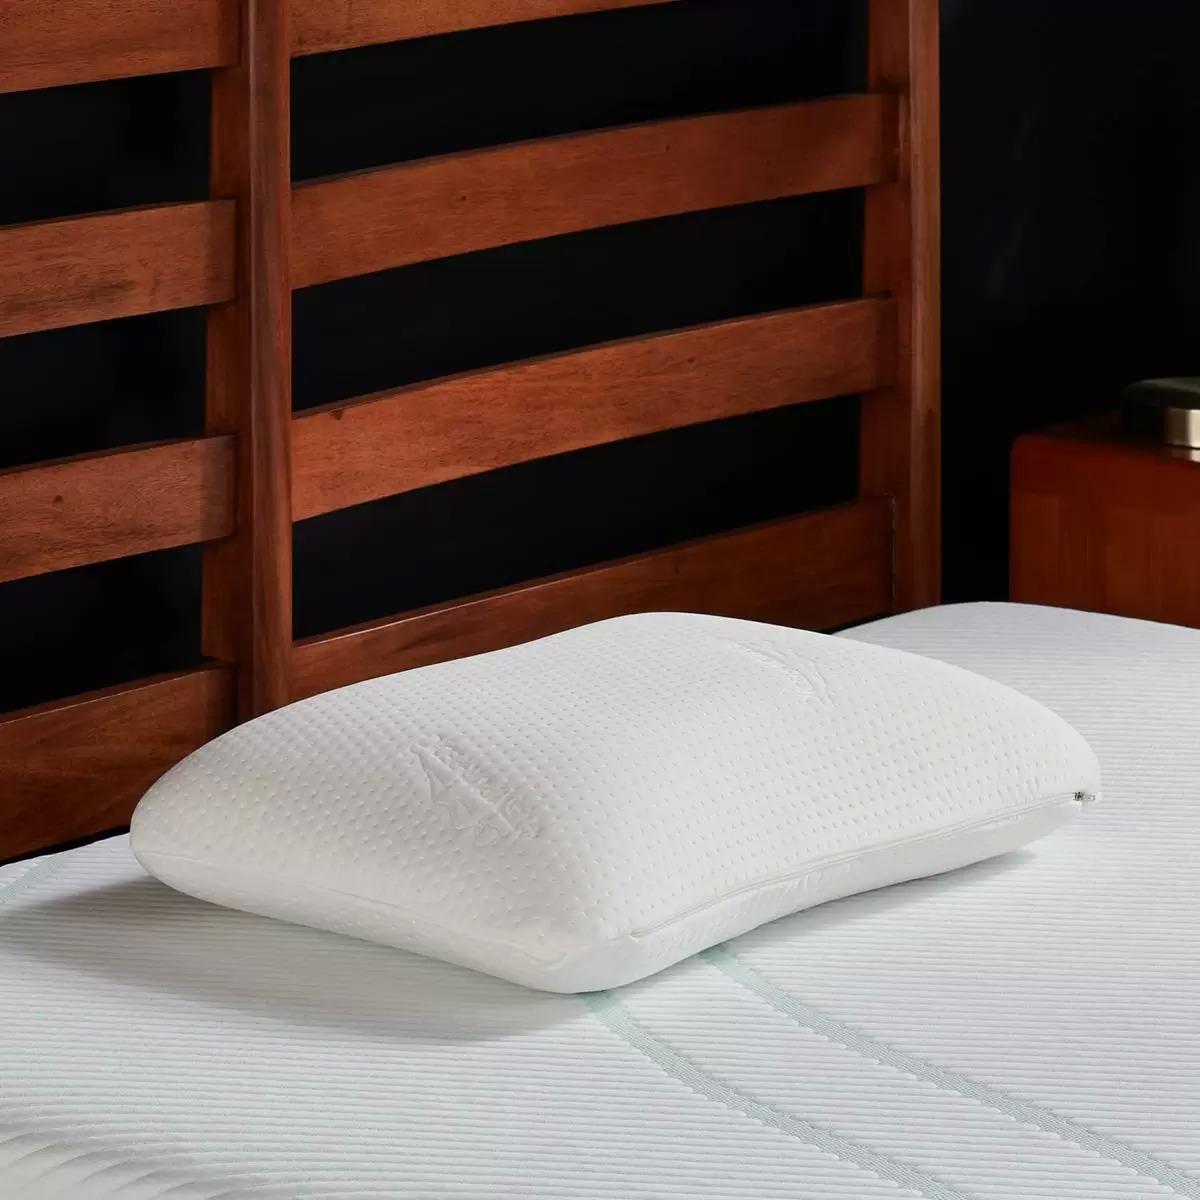 Tempur-Pedic Symphony Pillow Luxury Soft Feel for $46.82 Shipped